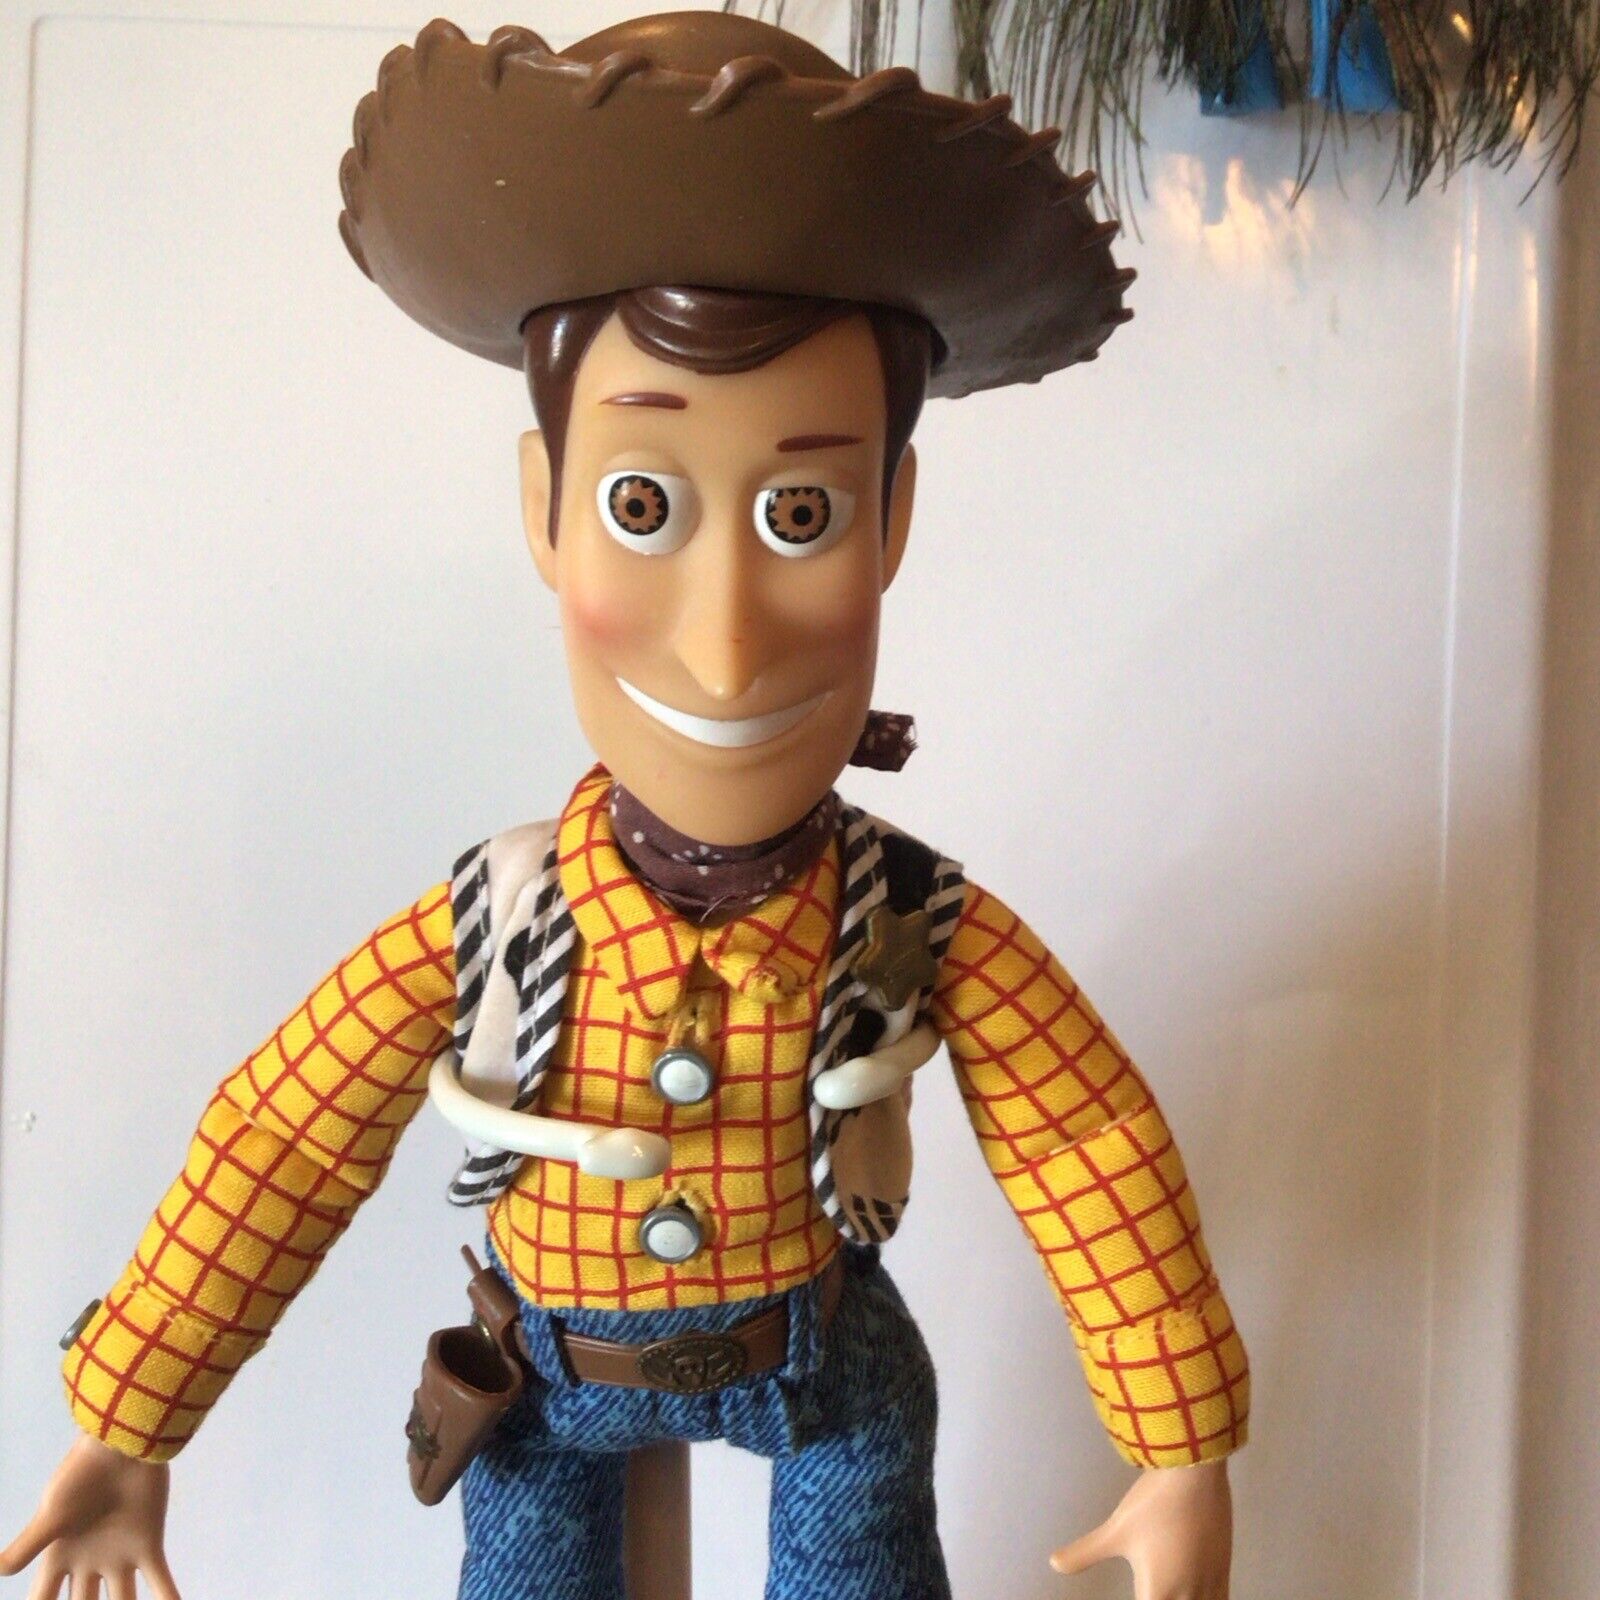 Disney Pixar Woody Talking Doll From Toy Story, 12” Tall